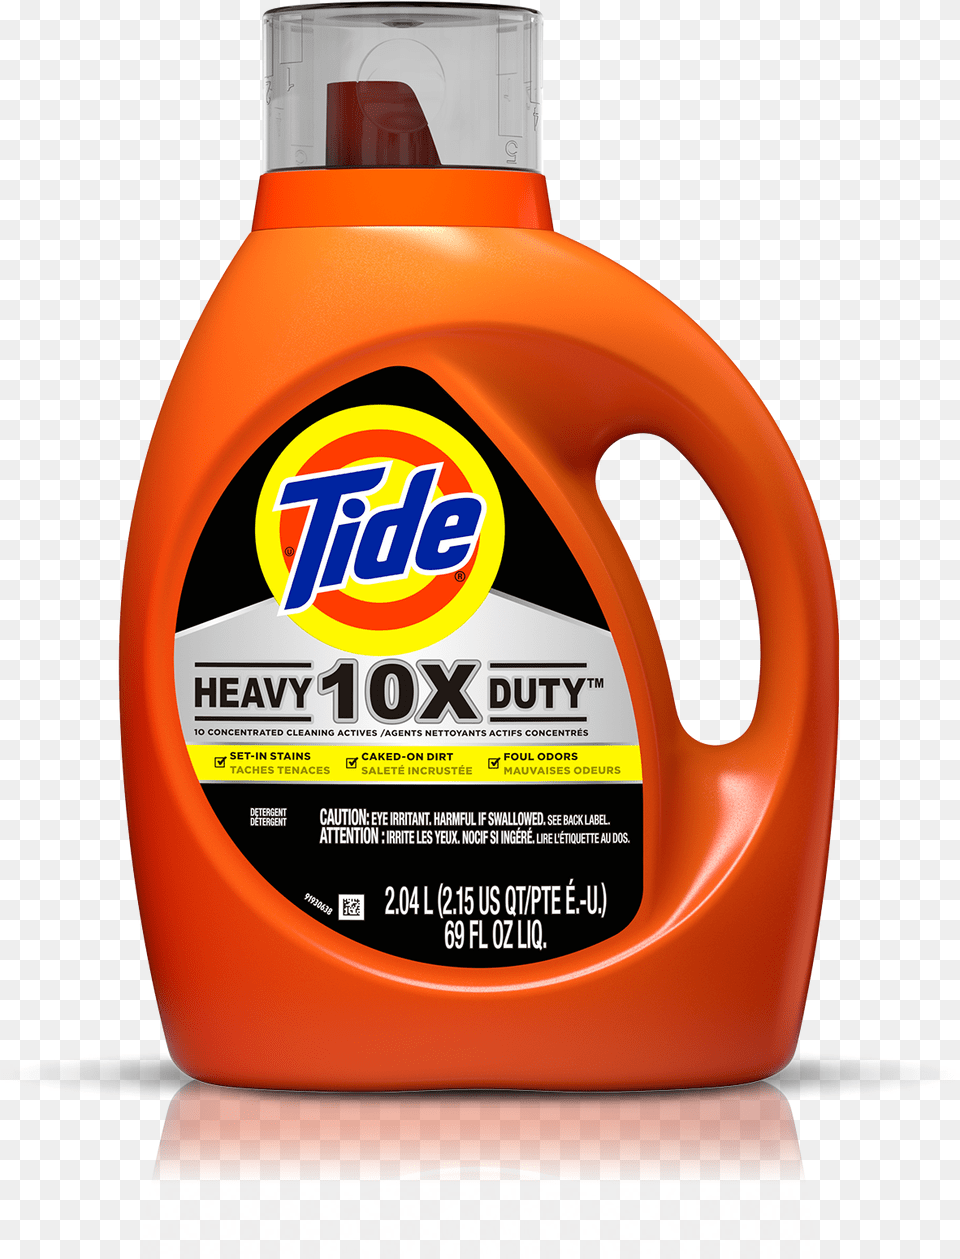 Tide Heavy Duty Liquid Laundry Detergent Comes In An, Bottle, Shaker, Food Png Image